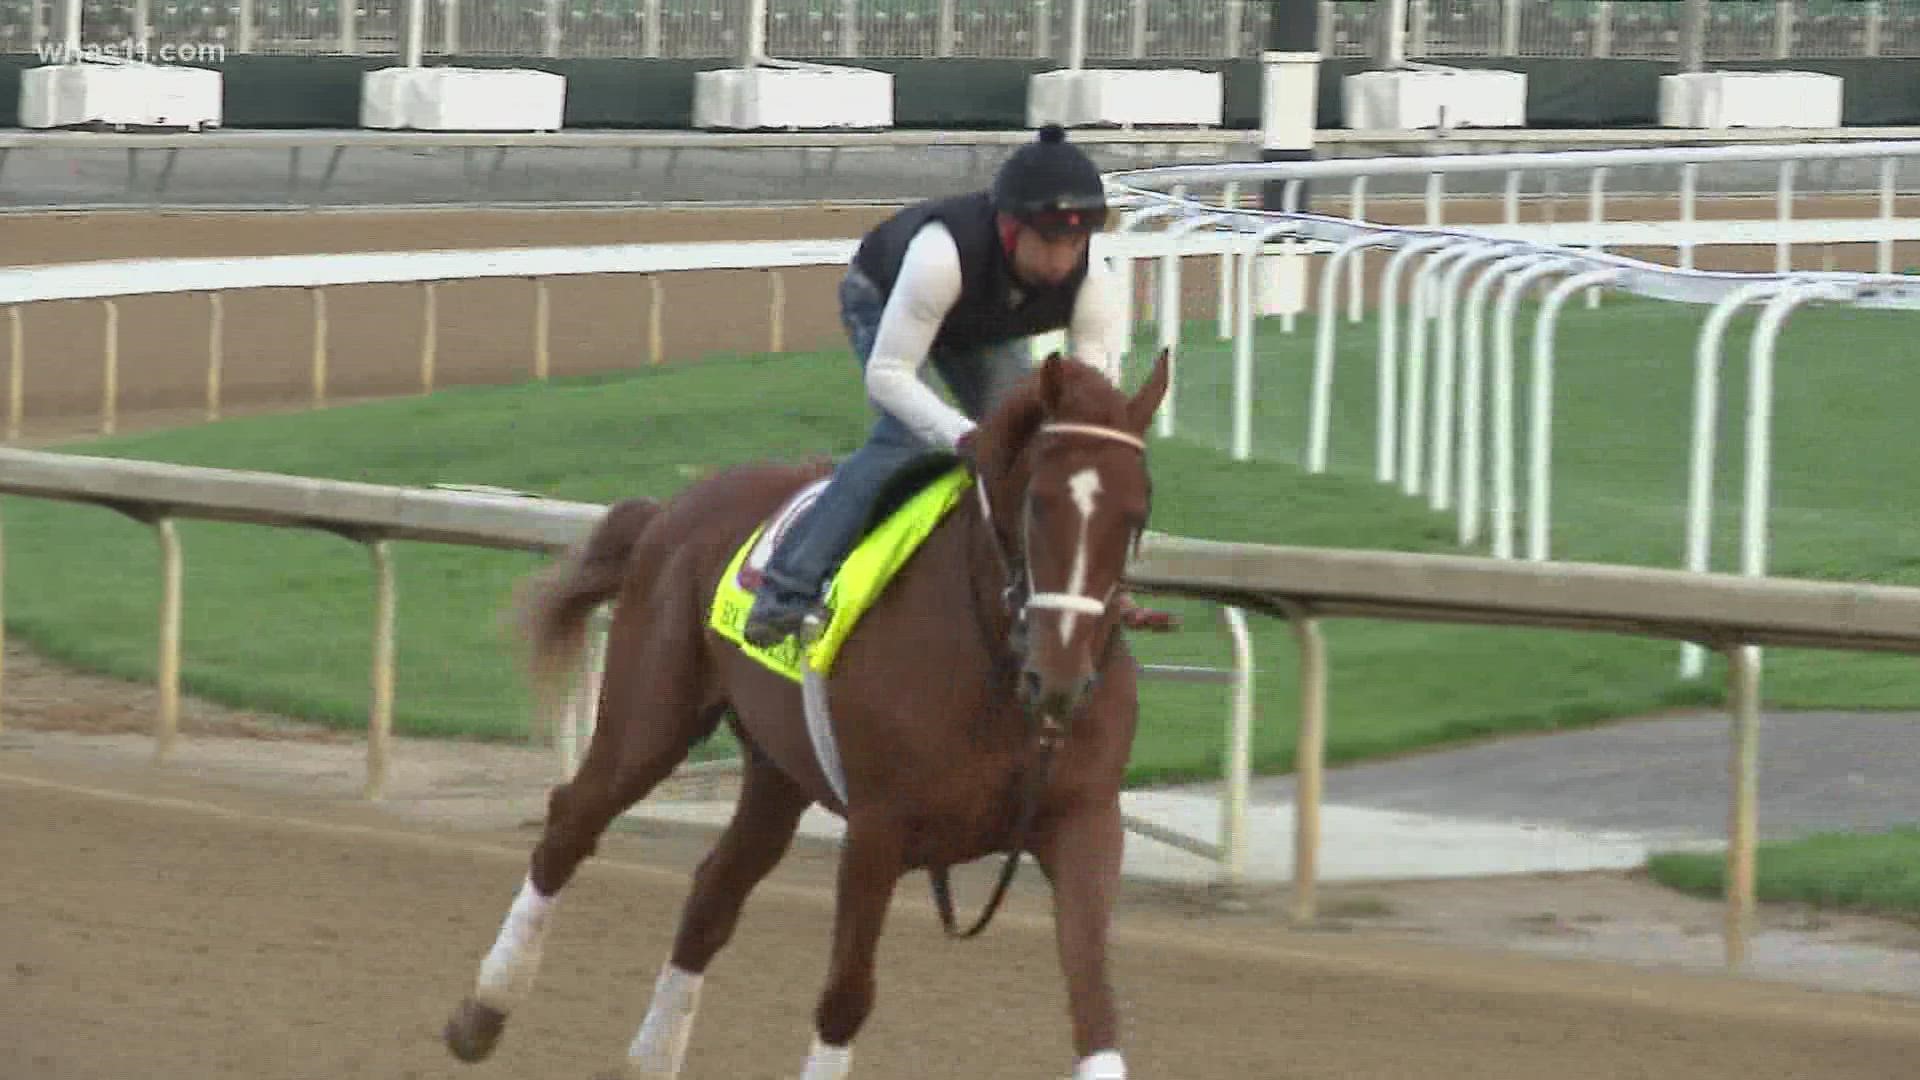 A scratch at the Kentucky Derby turned into good luck for the trainer and the 80-1 longshot.